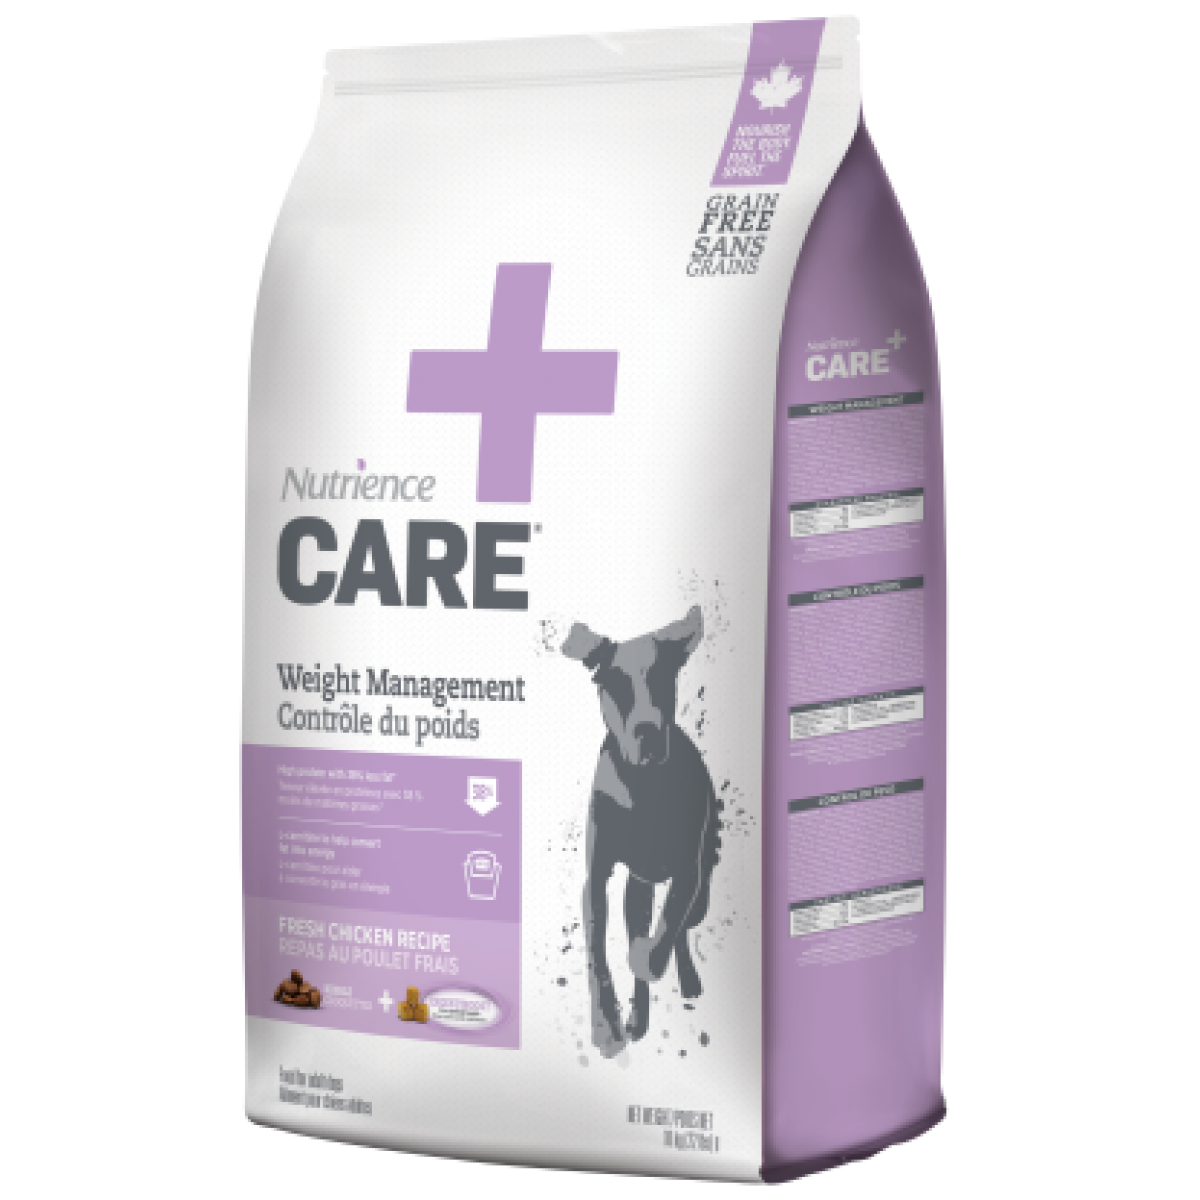 Nutrience Care - Weight Management Dry food For Dog 5lb